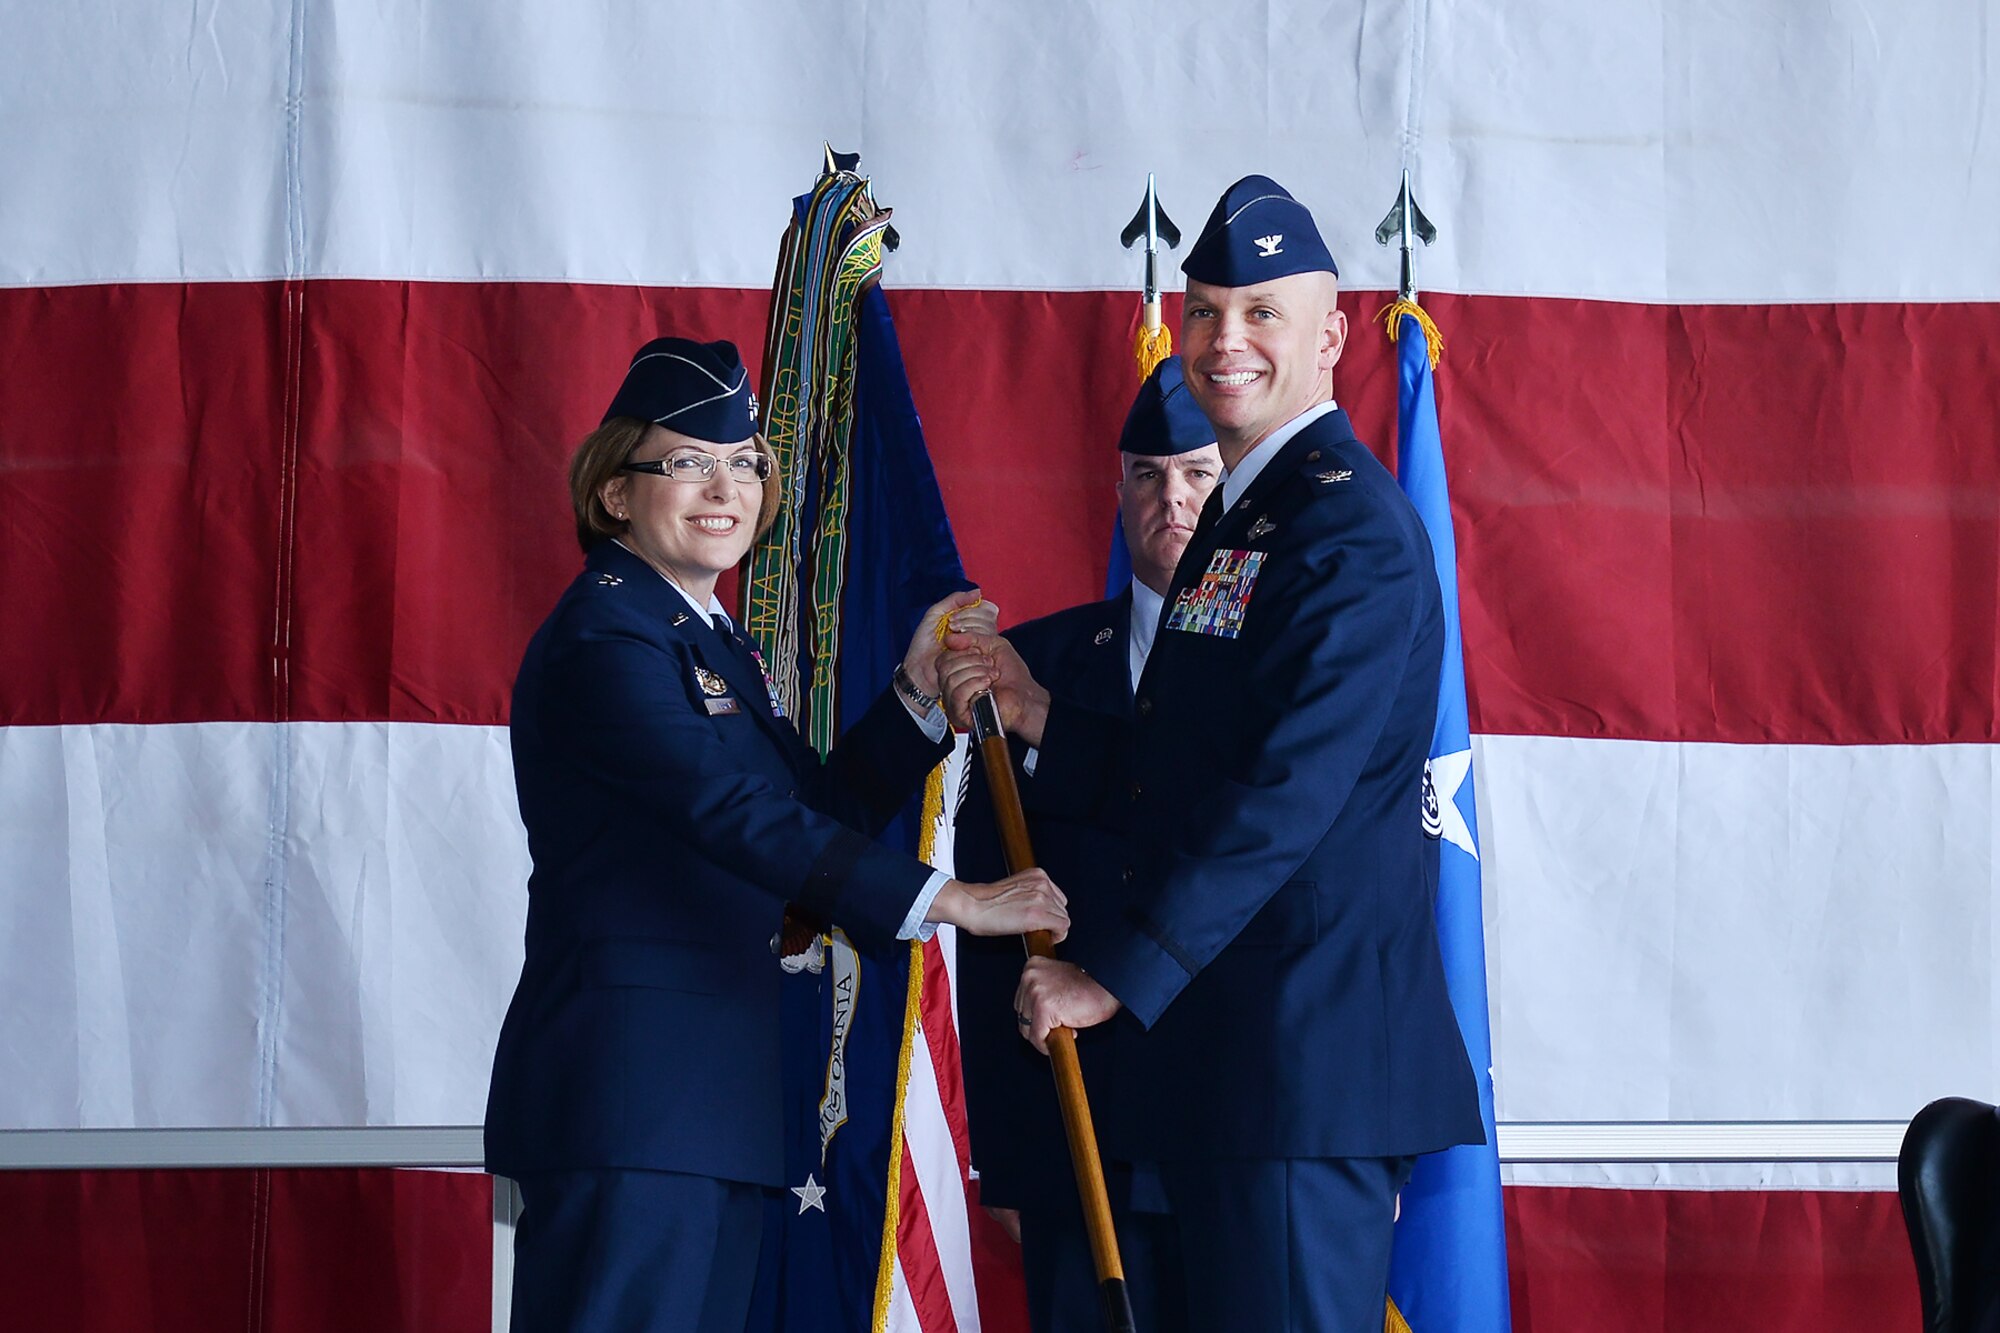 Maj. Gen. Mary F. O’Brien, 25th Air Force commander, presents Col. Michael Manion with the 55th Wing guidon during a chang of command ceremony in Dock 1 of the Bennie Davis Maintenance Facility June 8. The Fightin' Fifty-Fifth said farewell to Col. Marty Reynolds and welcomed Col. Manion.